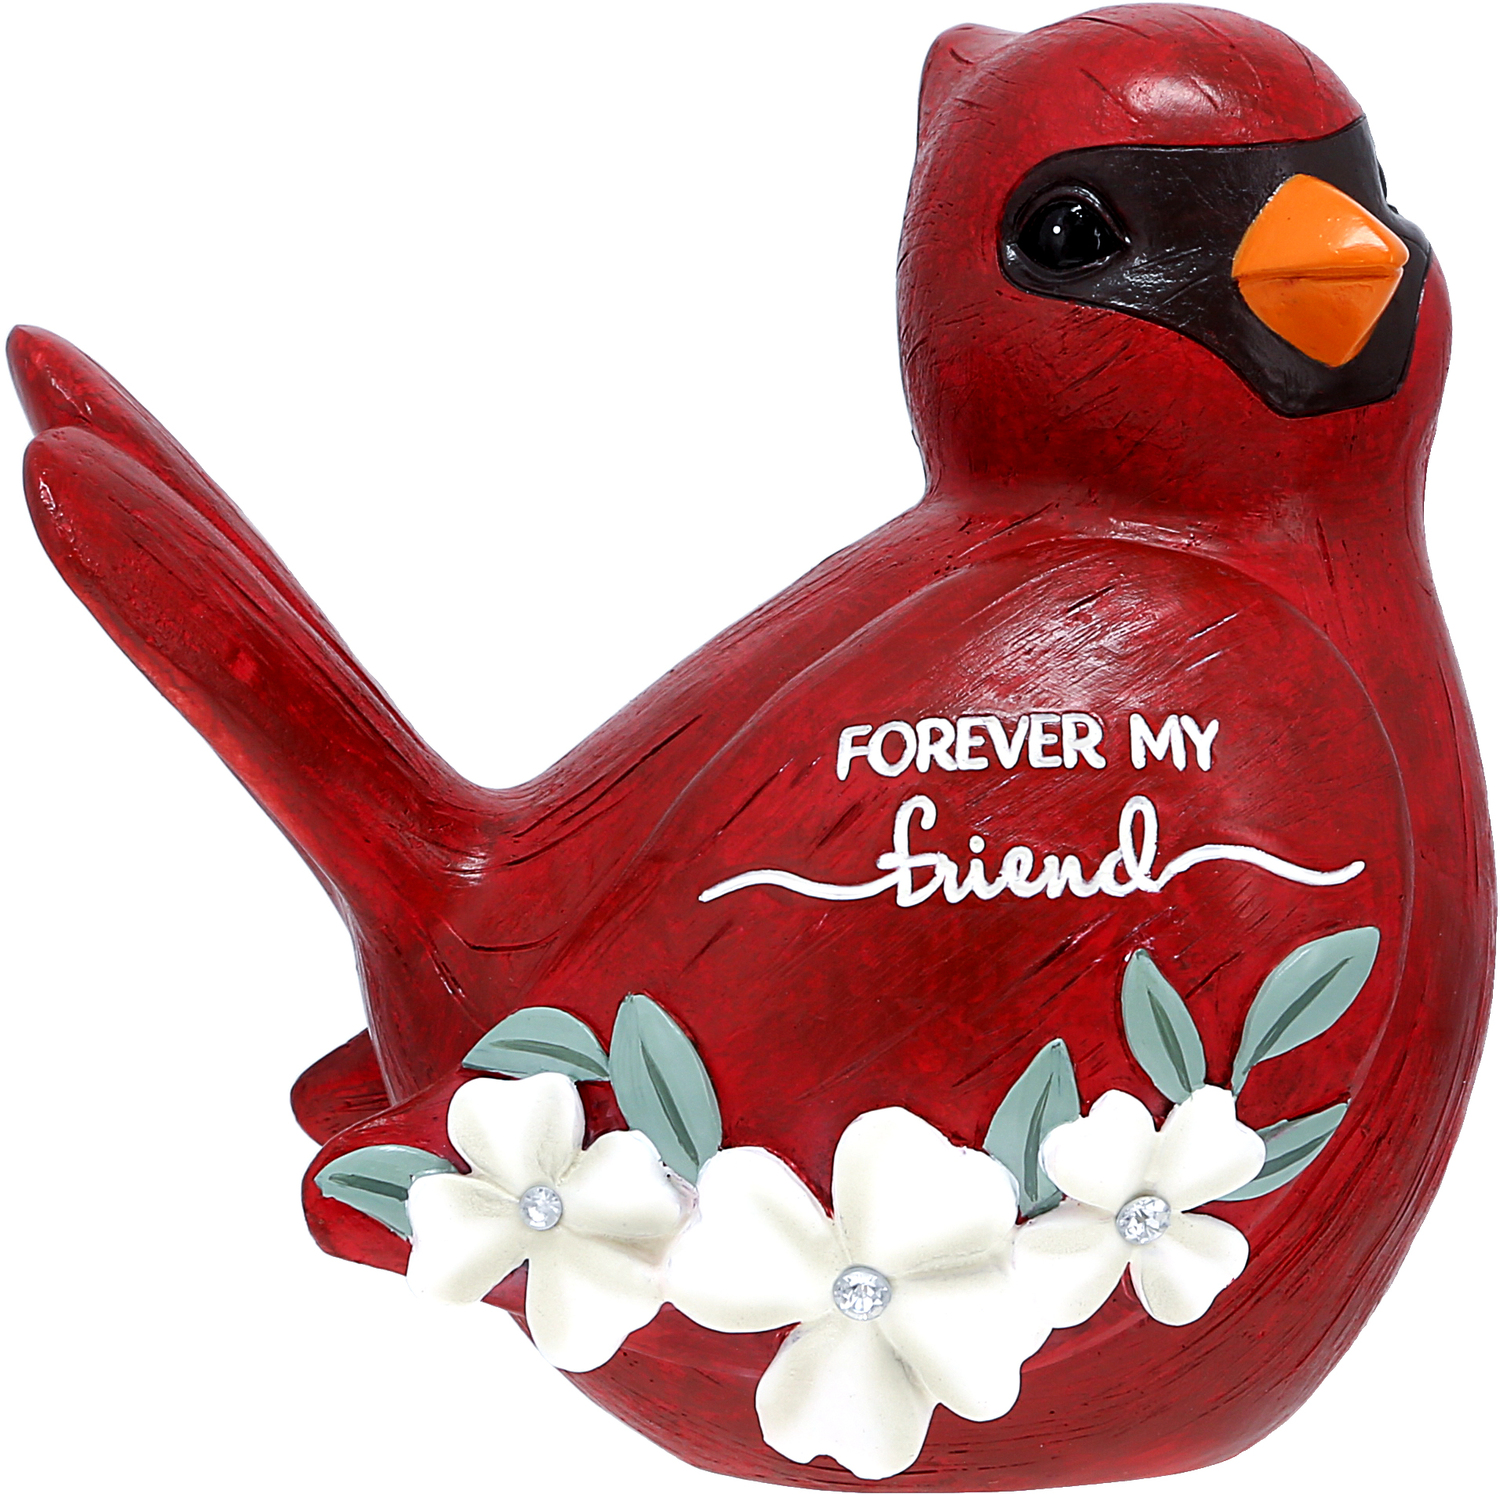 Friend by Always by Your Side - Friend - 4.25" Cardinal